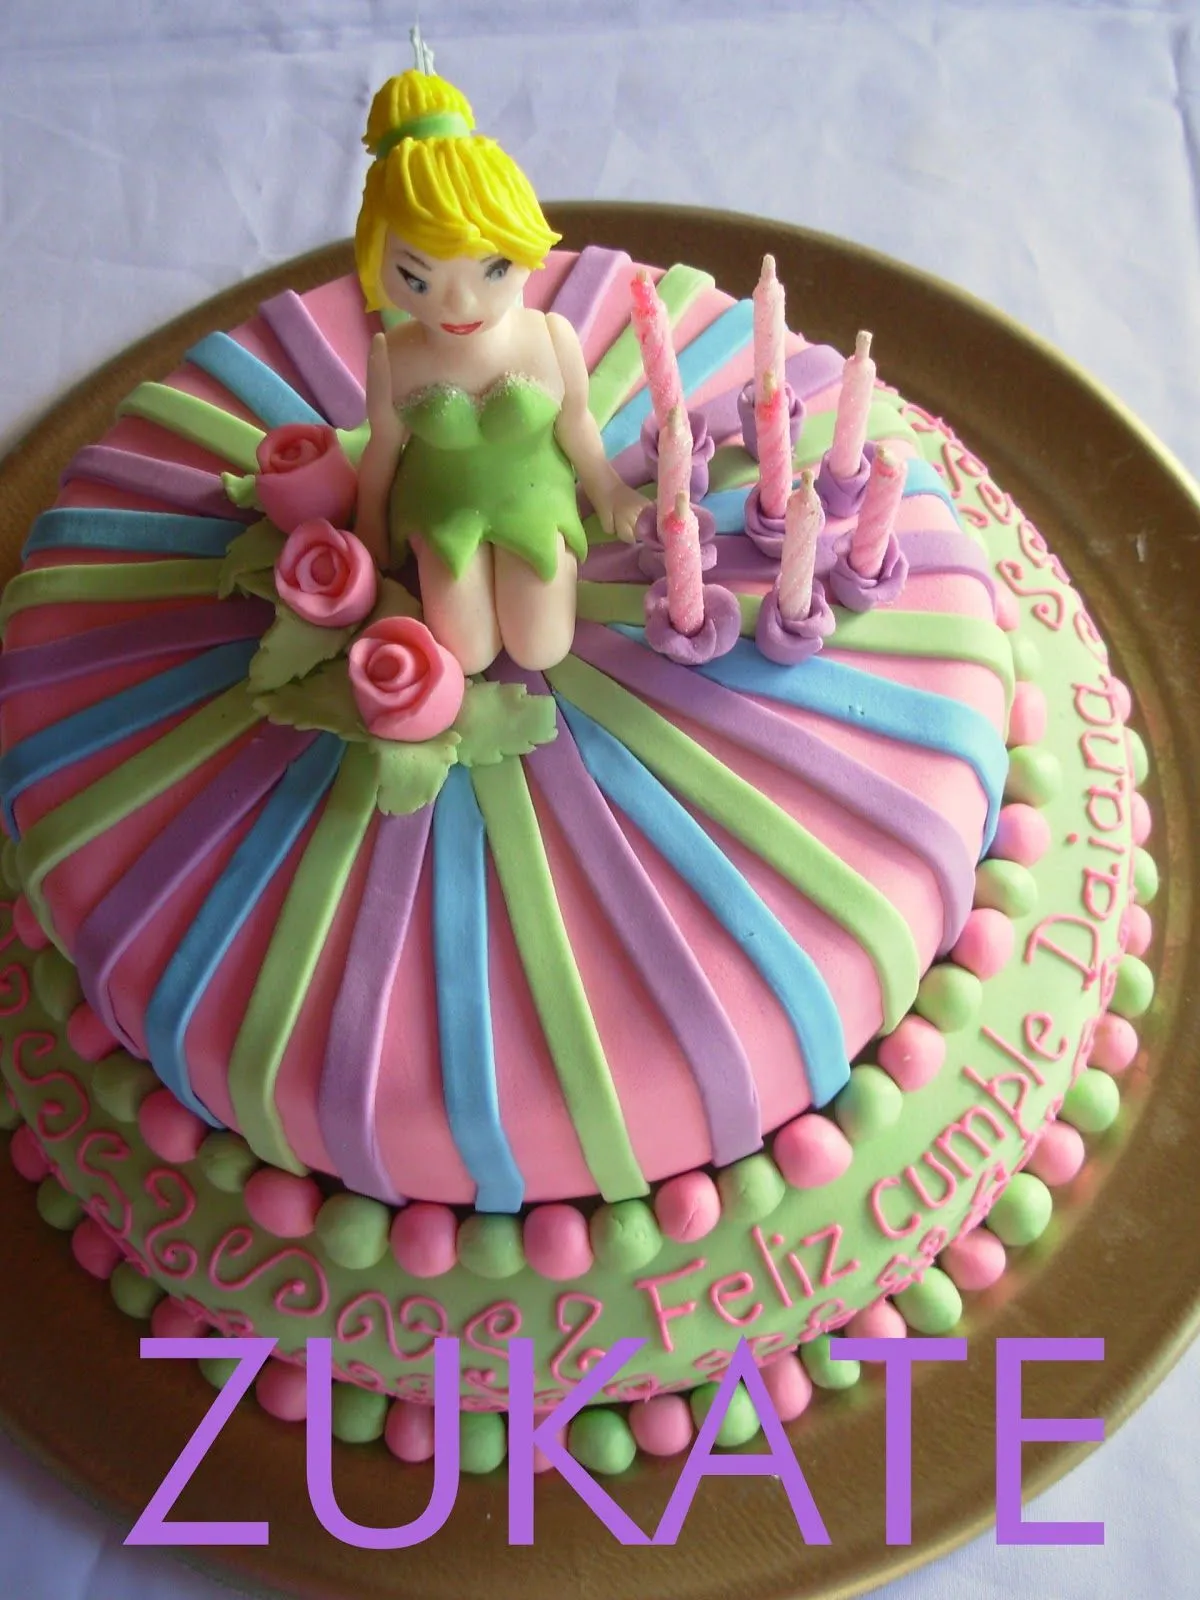 Torta flores con tinkerbell - Imagui